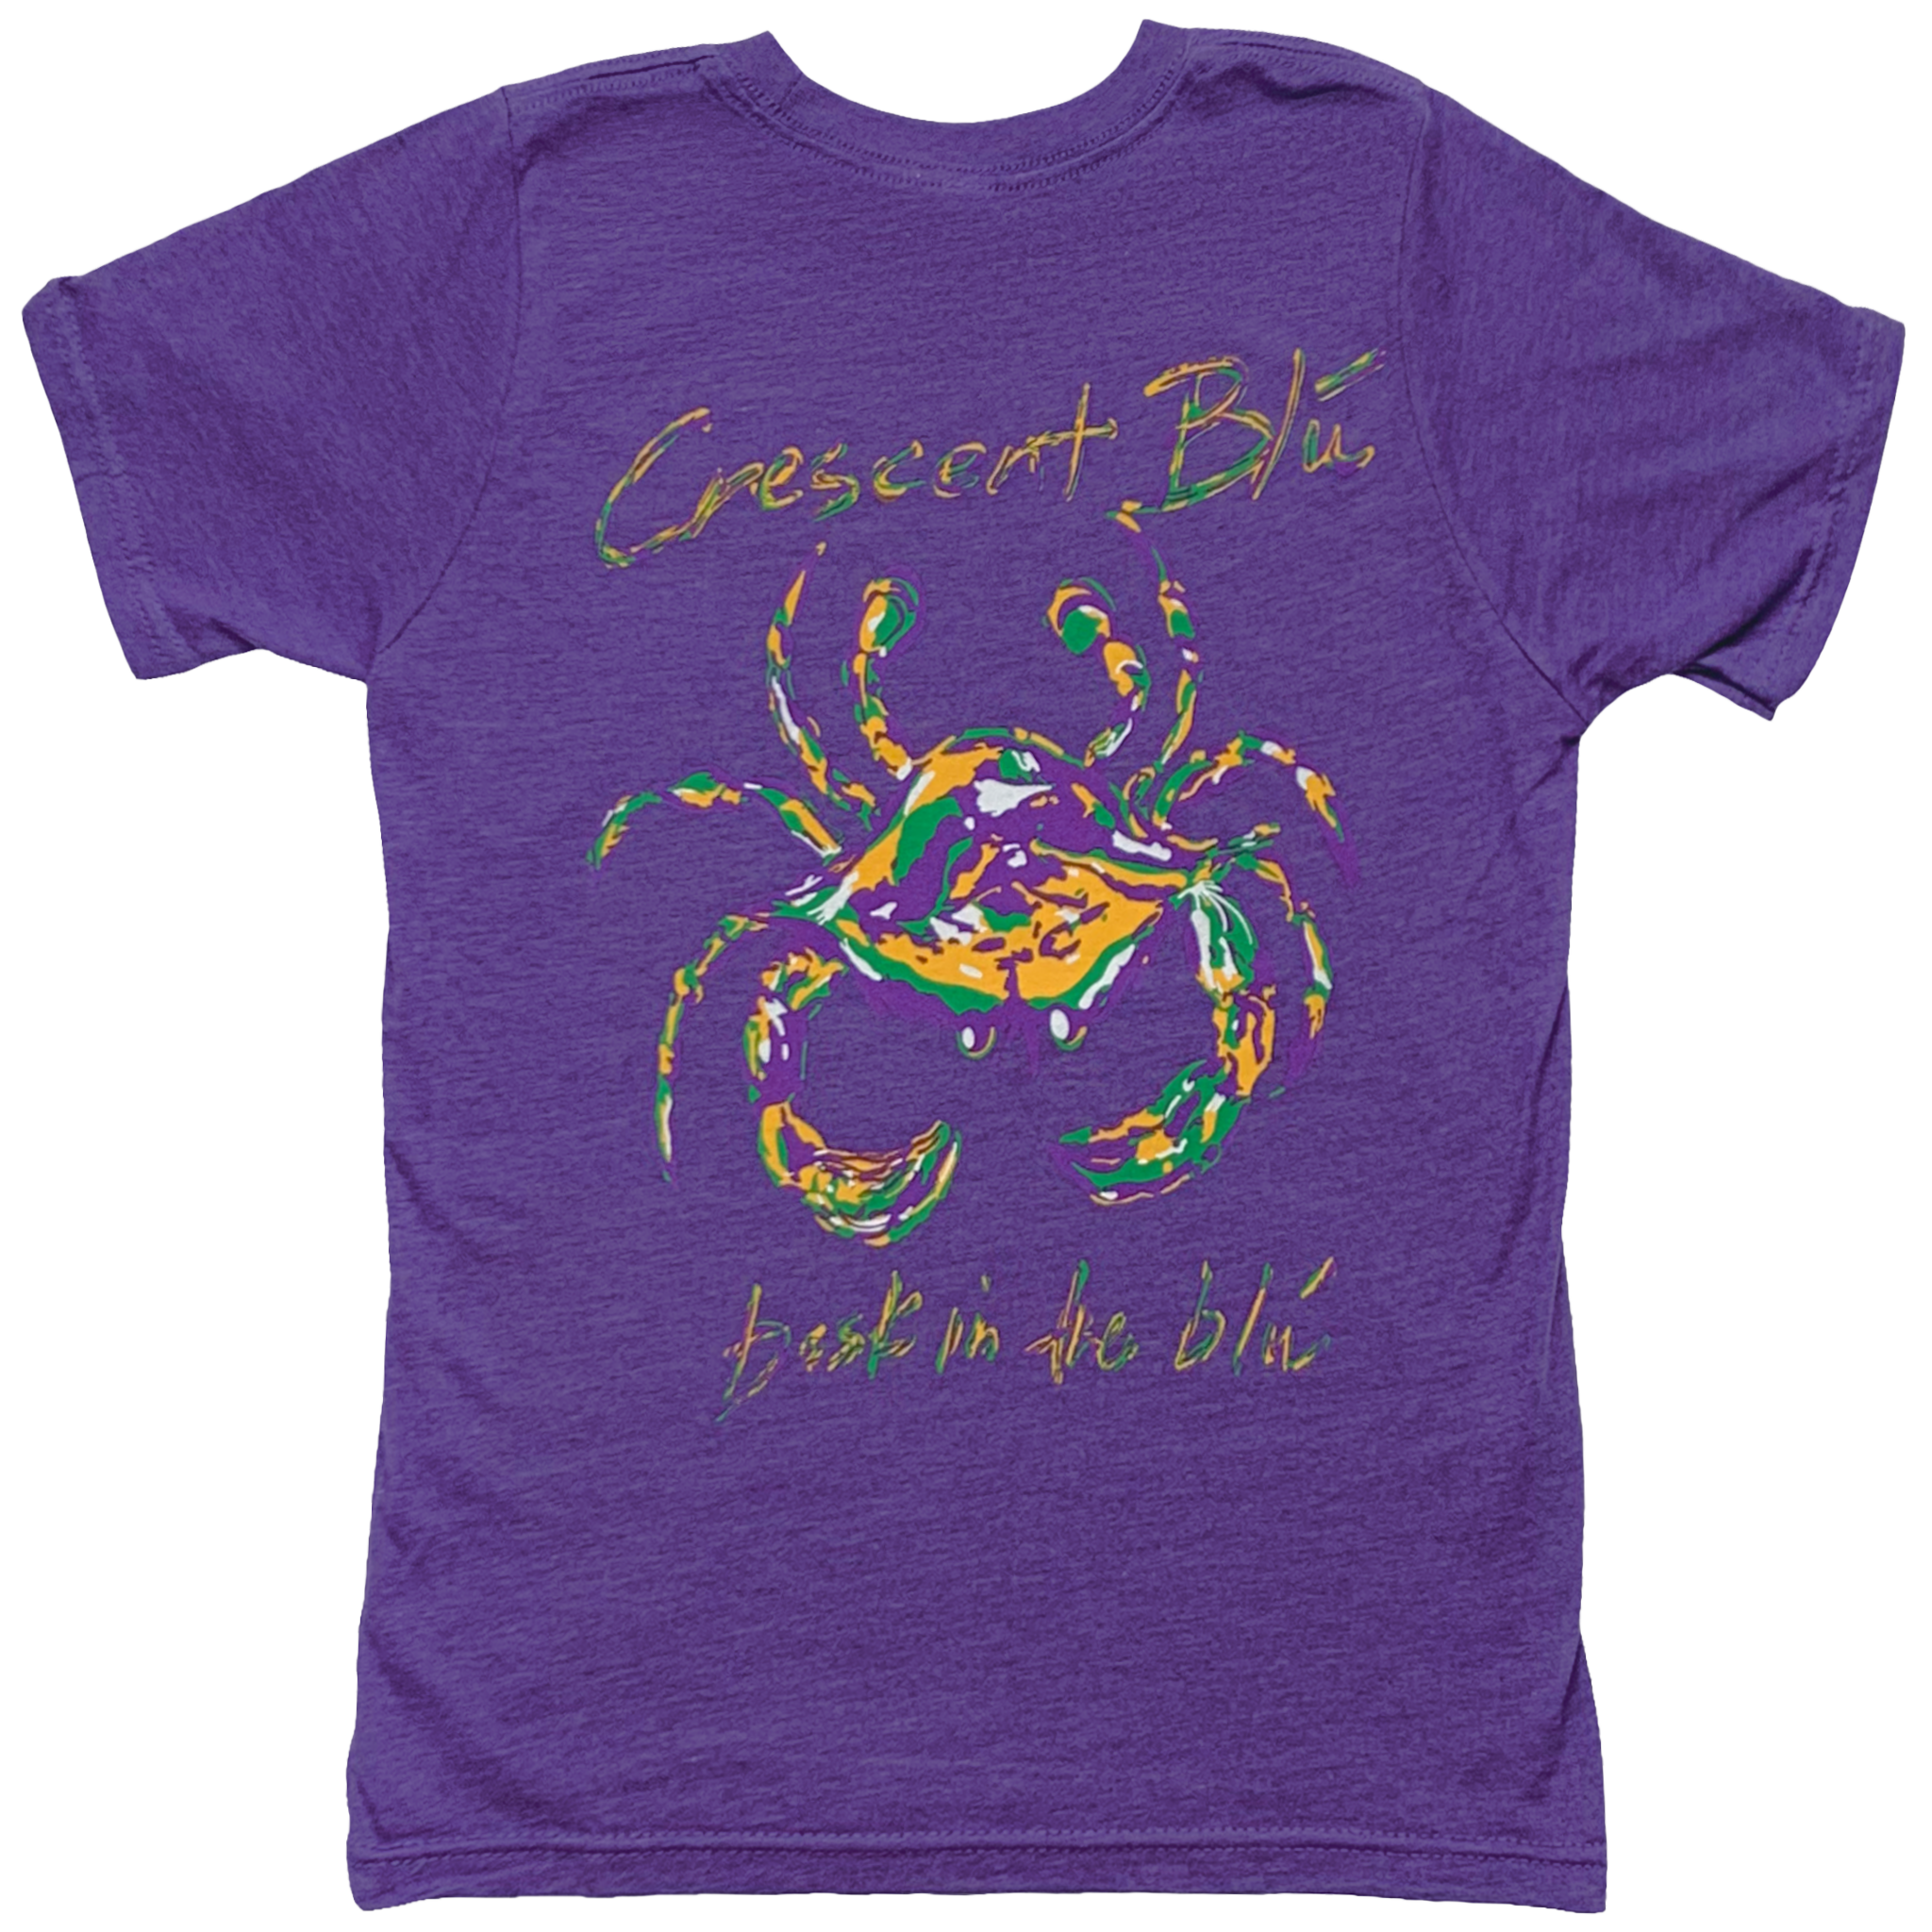 Heather purple t-shirt. A royal purple, gold, white, and green crab with the words "Crescent Blu, "bask in the blu" above and below the crab. 